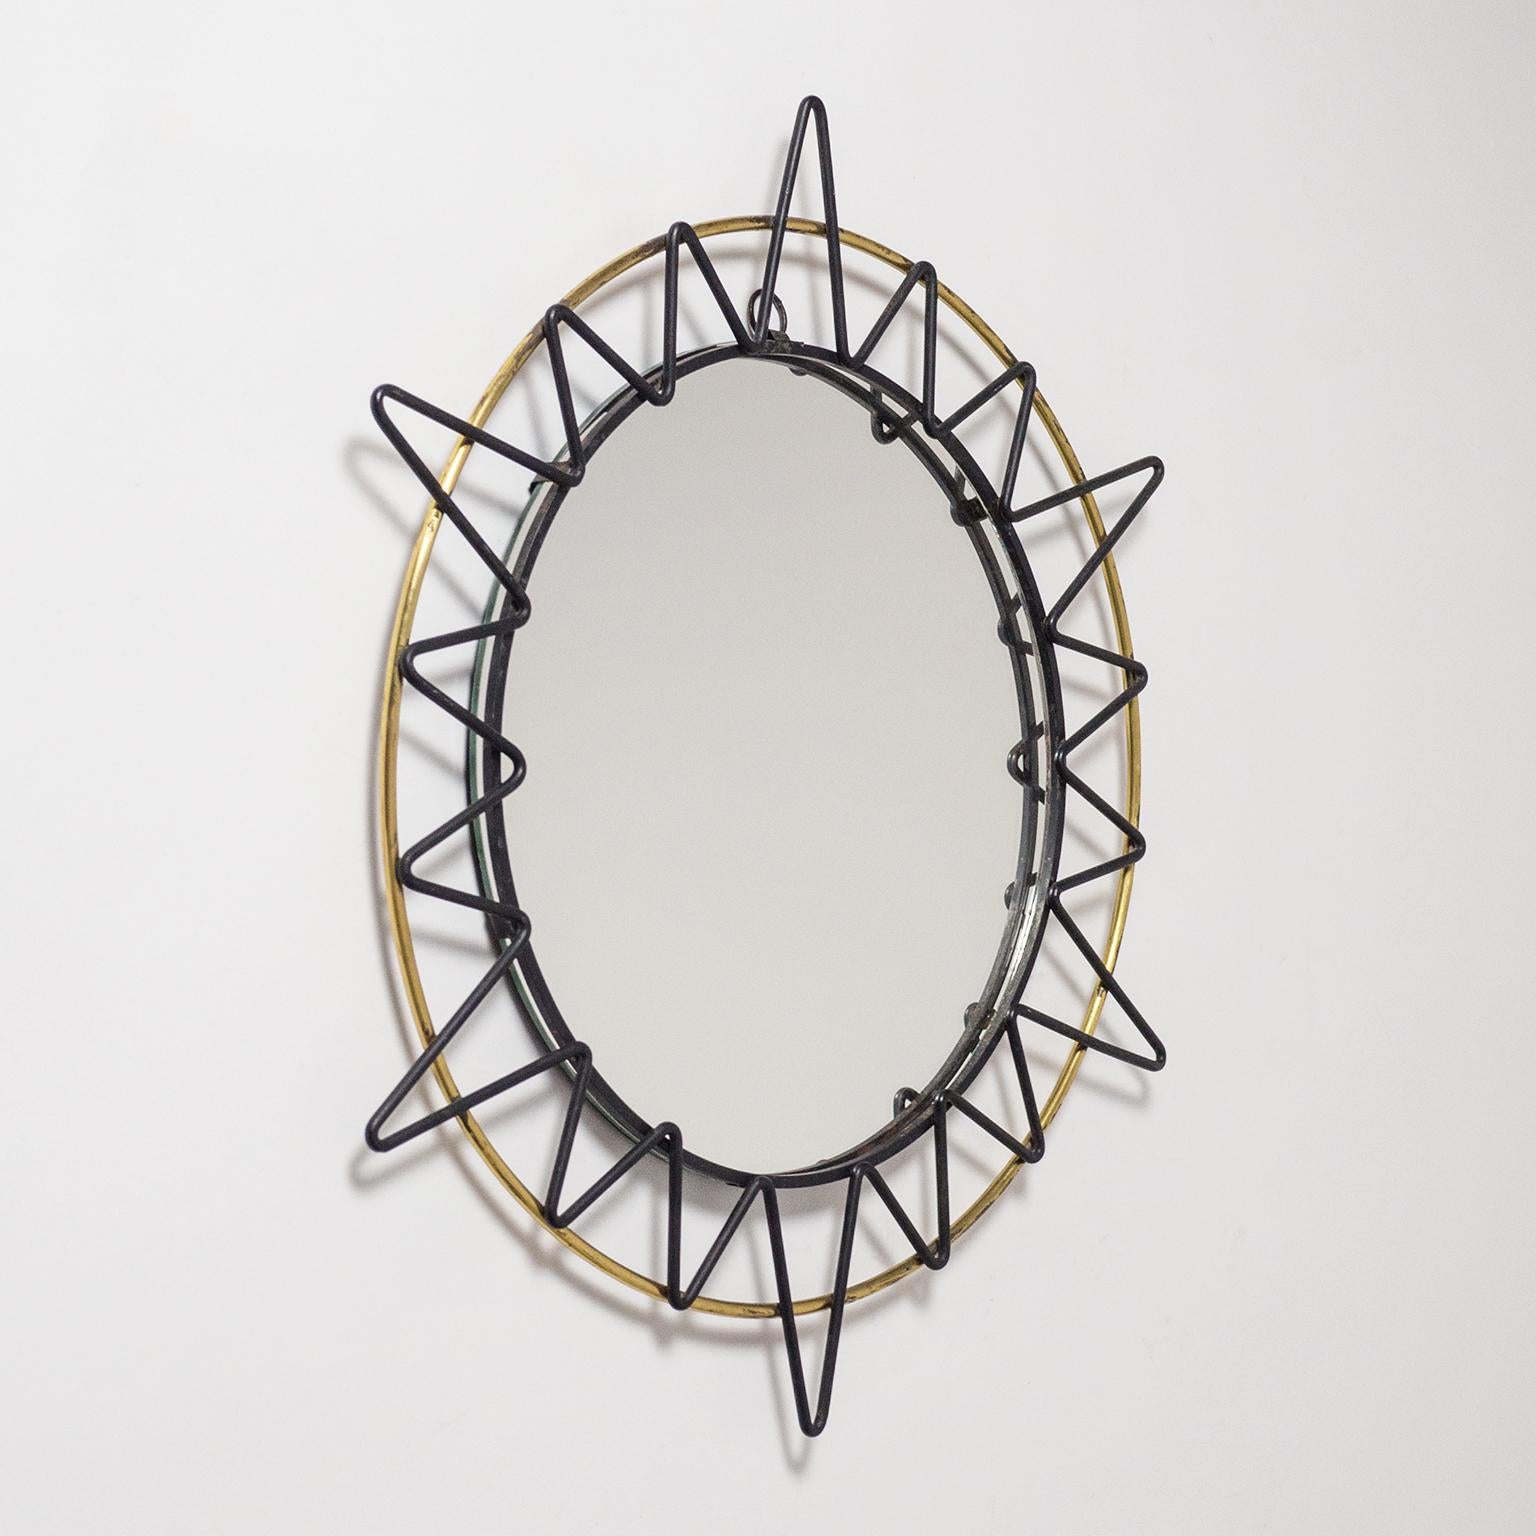 Fine French artisanal sunburts mirror from the 1950s. A slim brass ring with black lacquered 'zig-zag' sun rays. Fine original condition with some patina on the brass and original lacquer. Mirror diameter is circa 10inches/26cm.